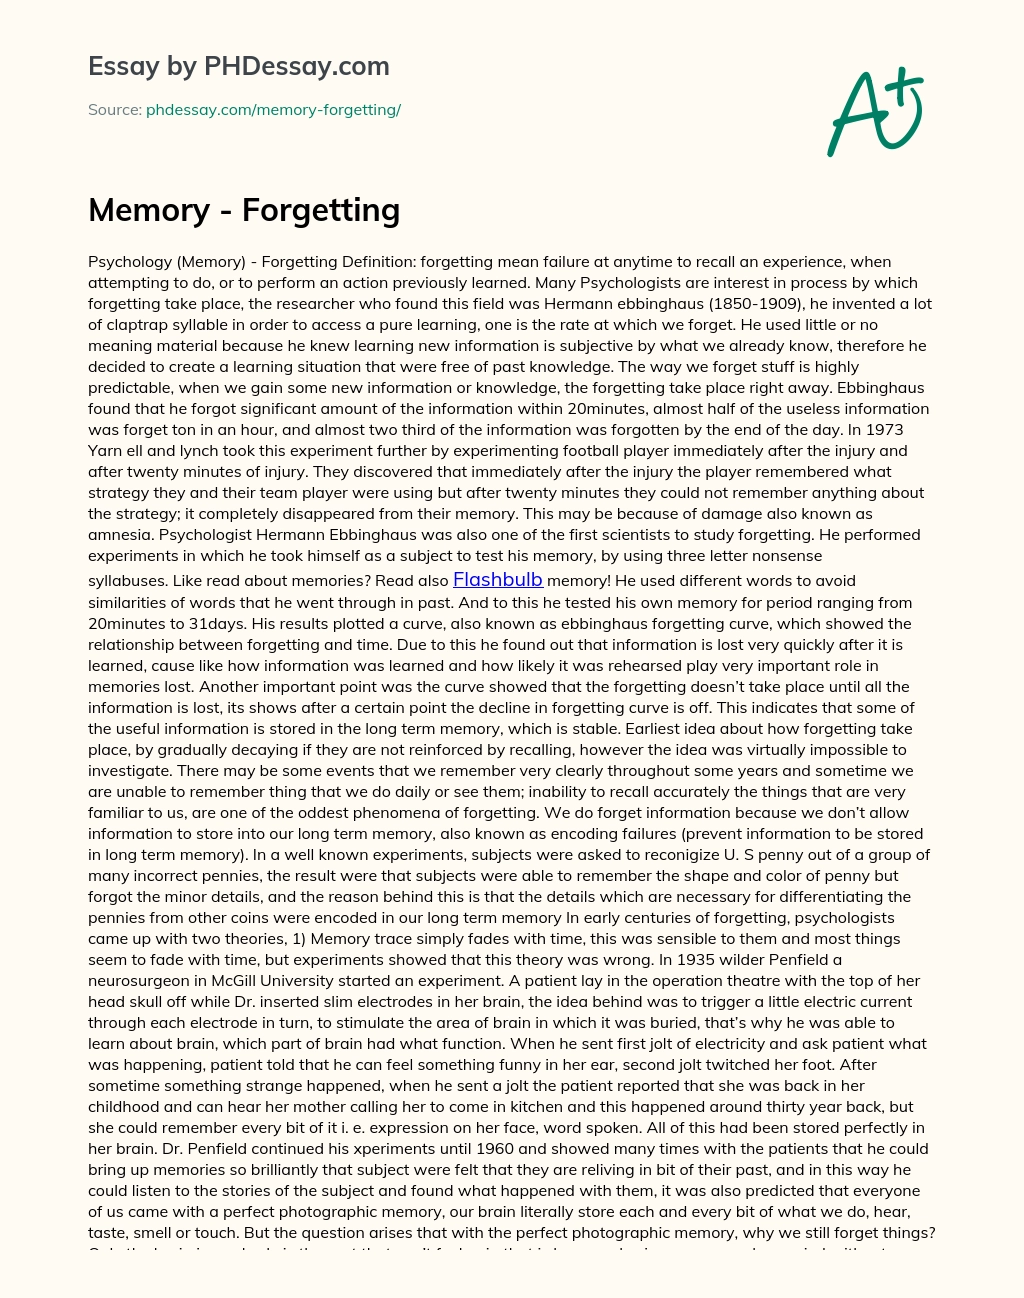 Memory – Forgetting essay